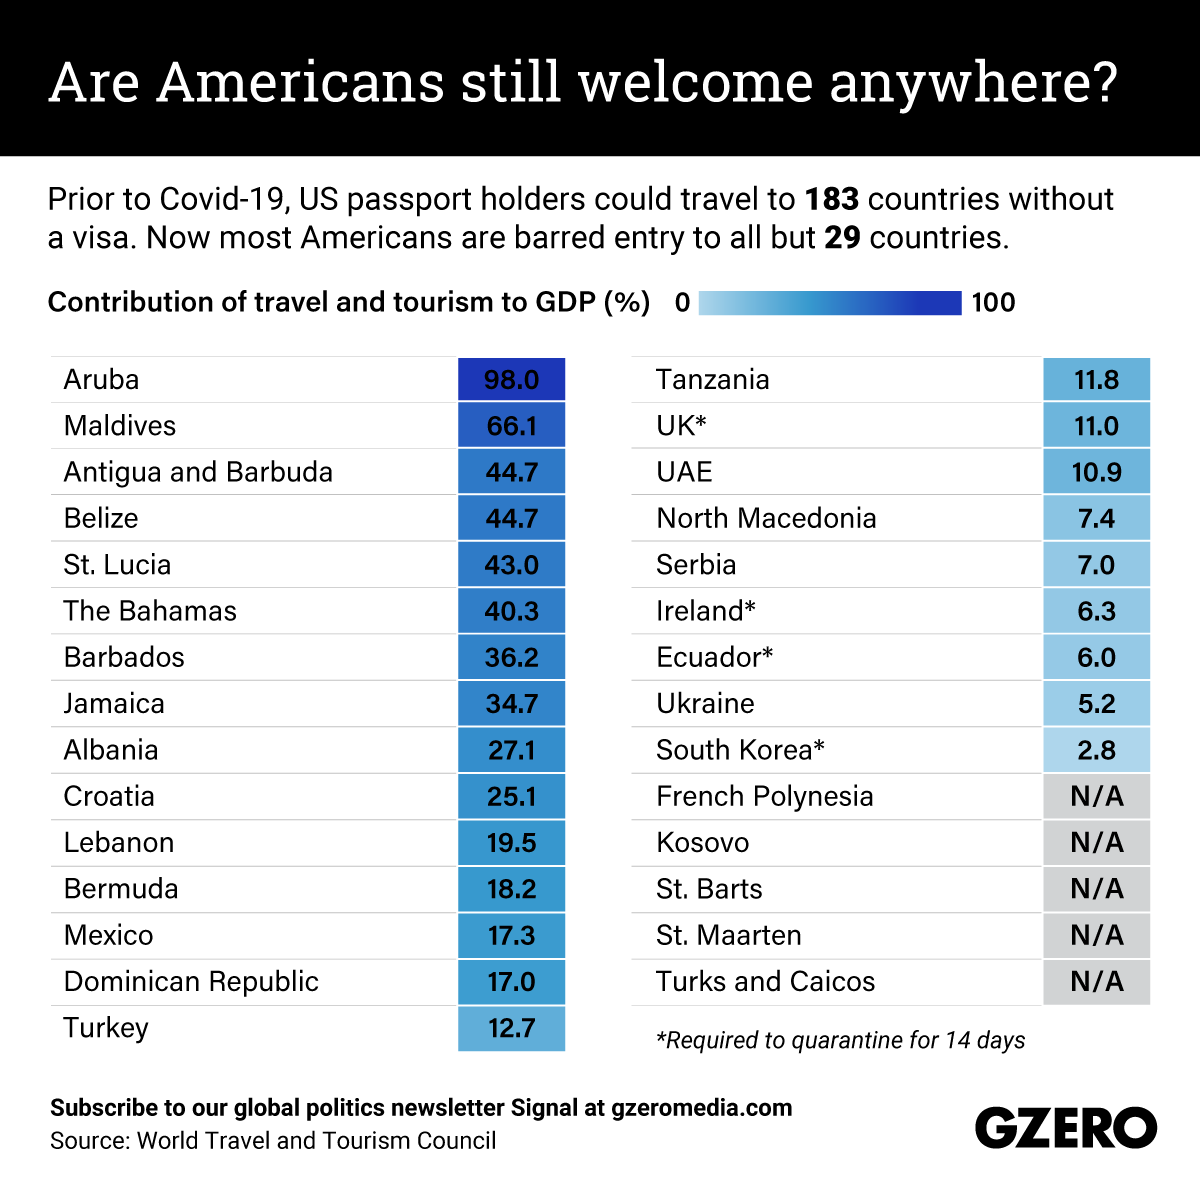 The Graphic Truth: Are Americans still welcome anywhere?